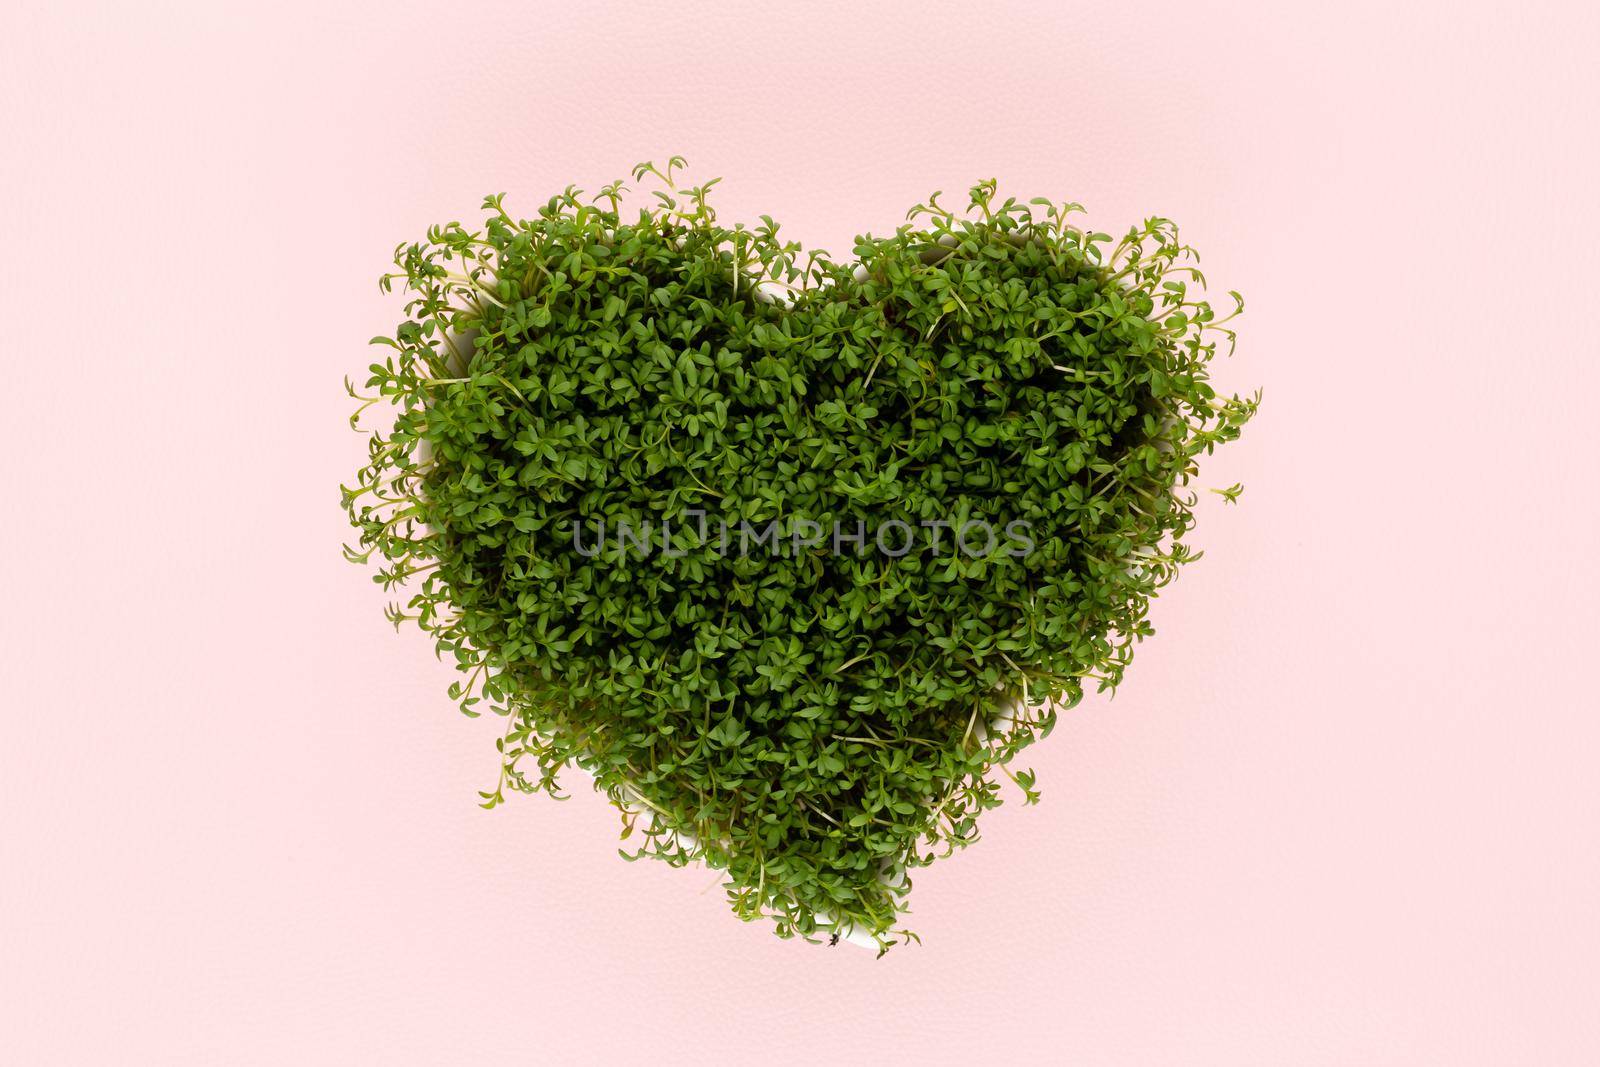 Alfalfa seed sprouts, healthy diet superfood and clean eating concept, heart shaped seed sprouts top view.

